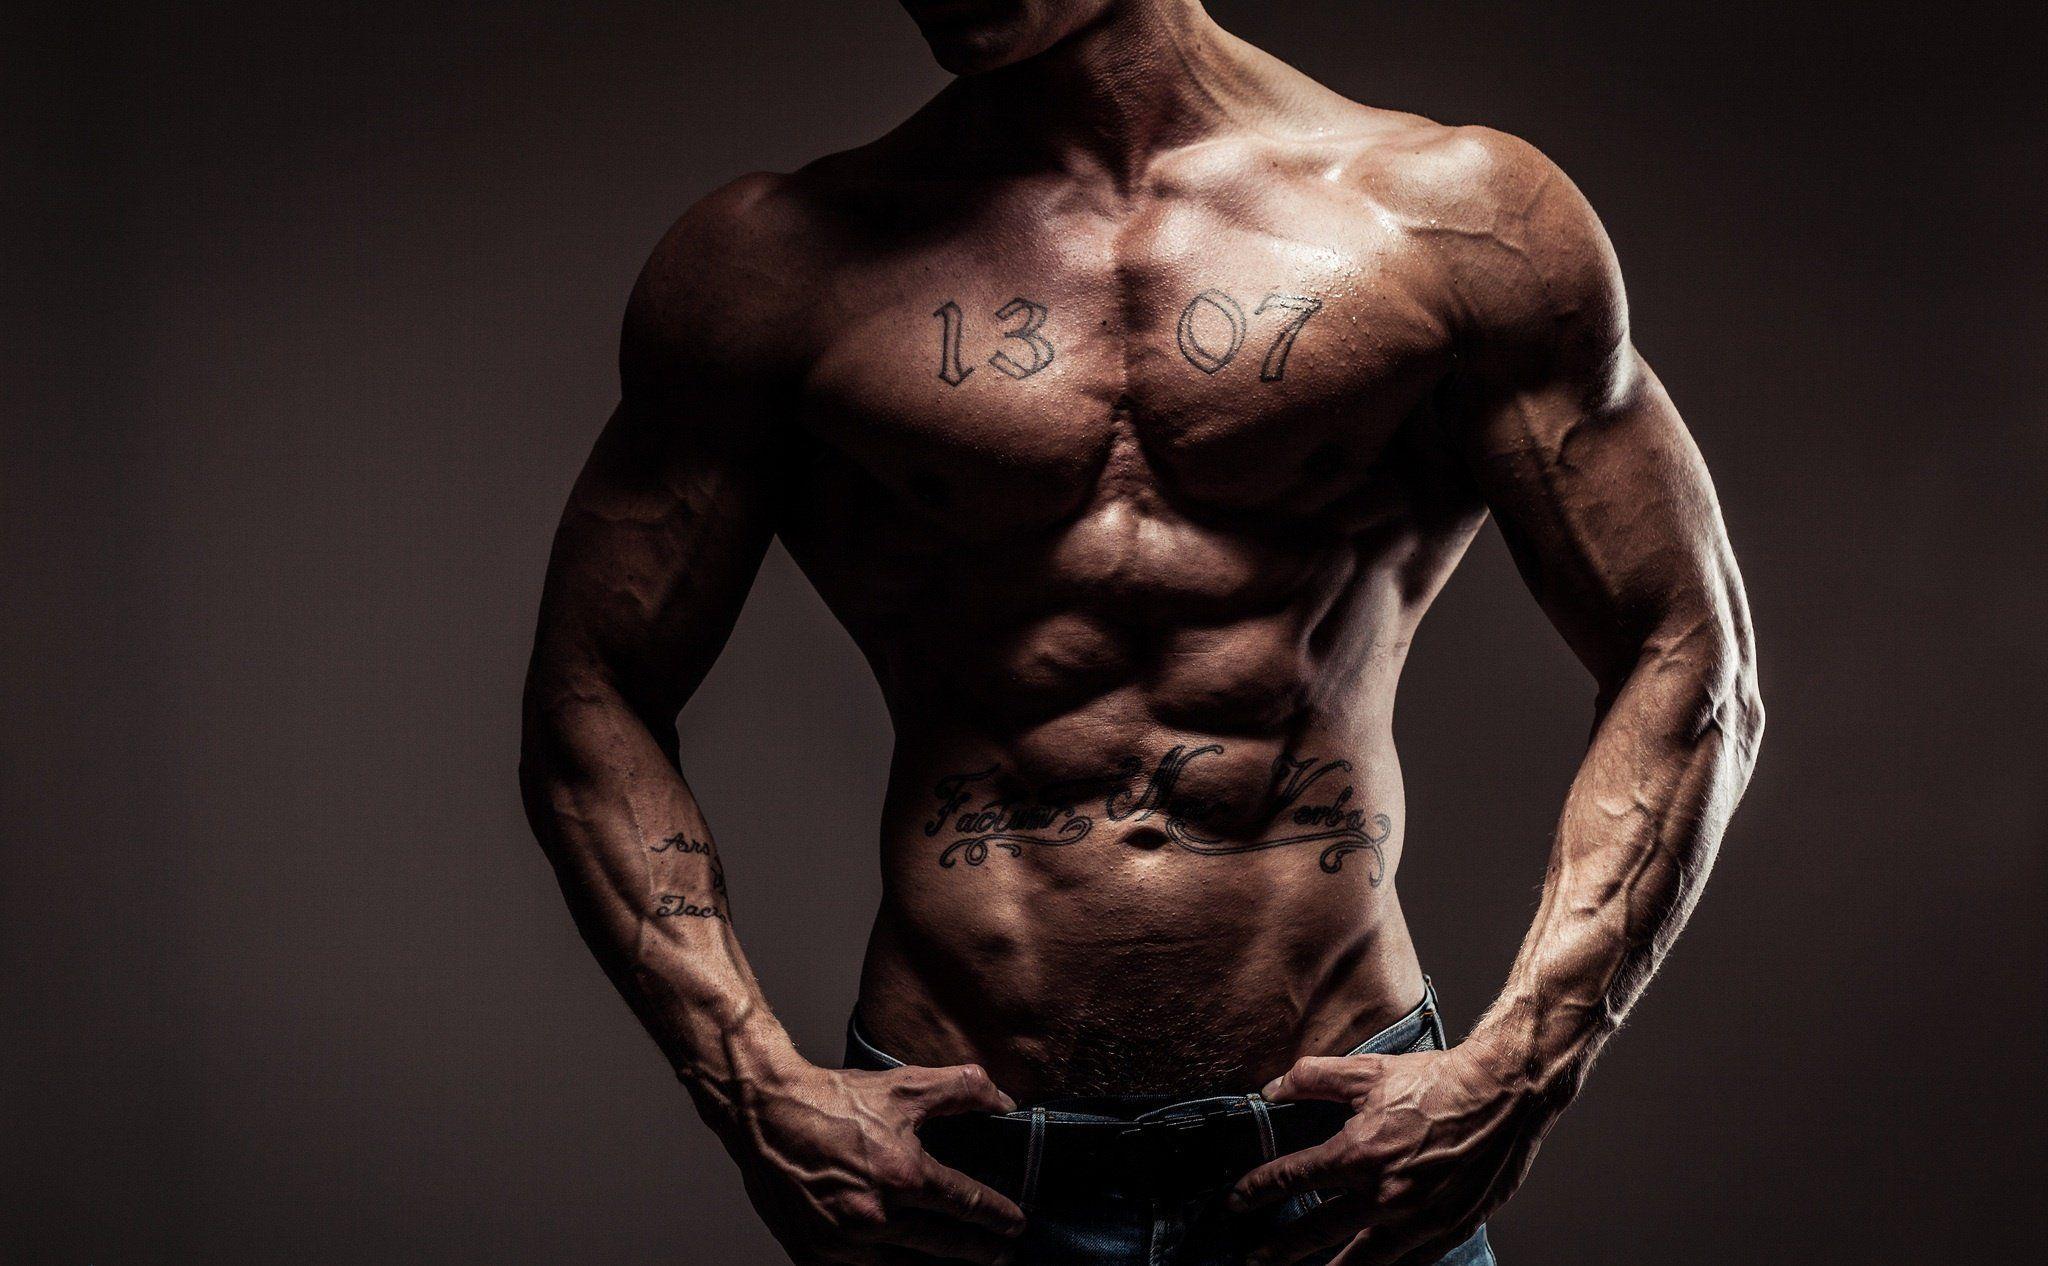 Man muscles backgrounds jeans tattoos sexy wallpapers.